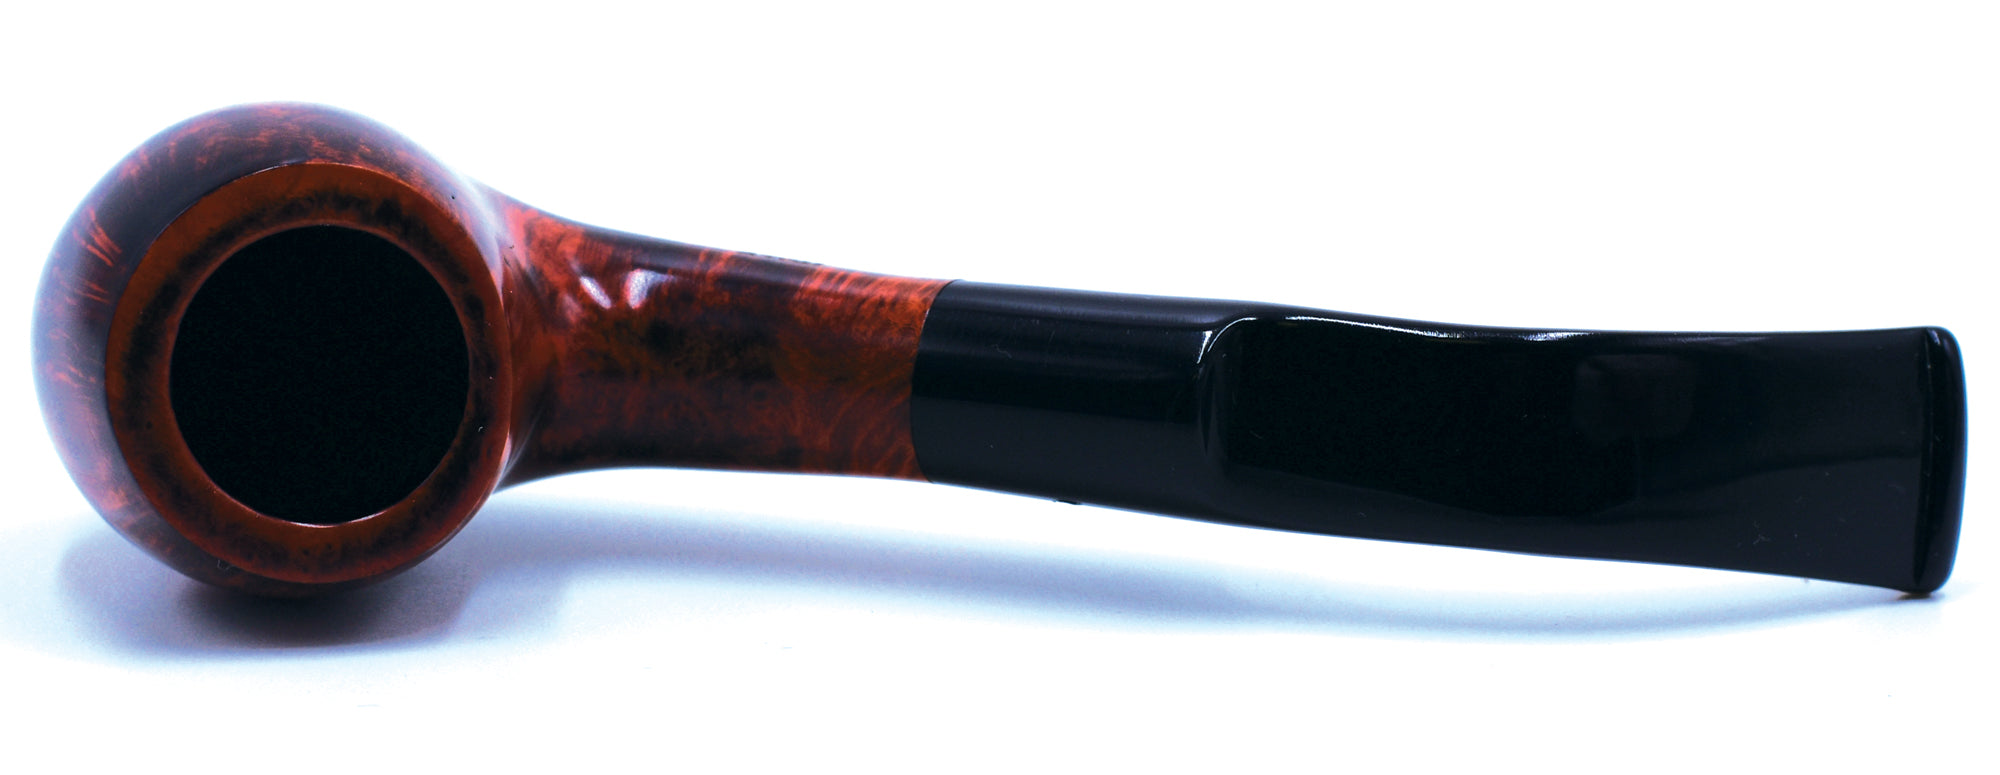 LEGENDEX® SCALADI* 9 MM Filtered Briar Smoking Pipe Made In Italy 01-08-136